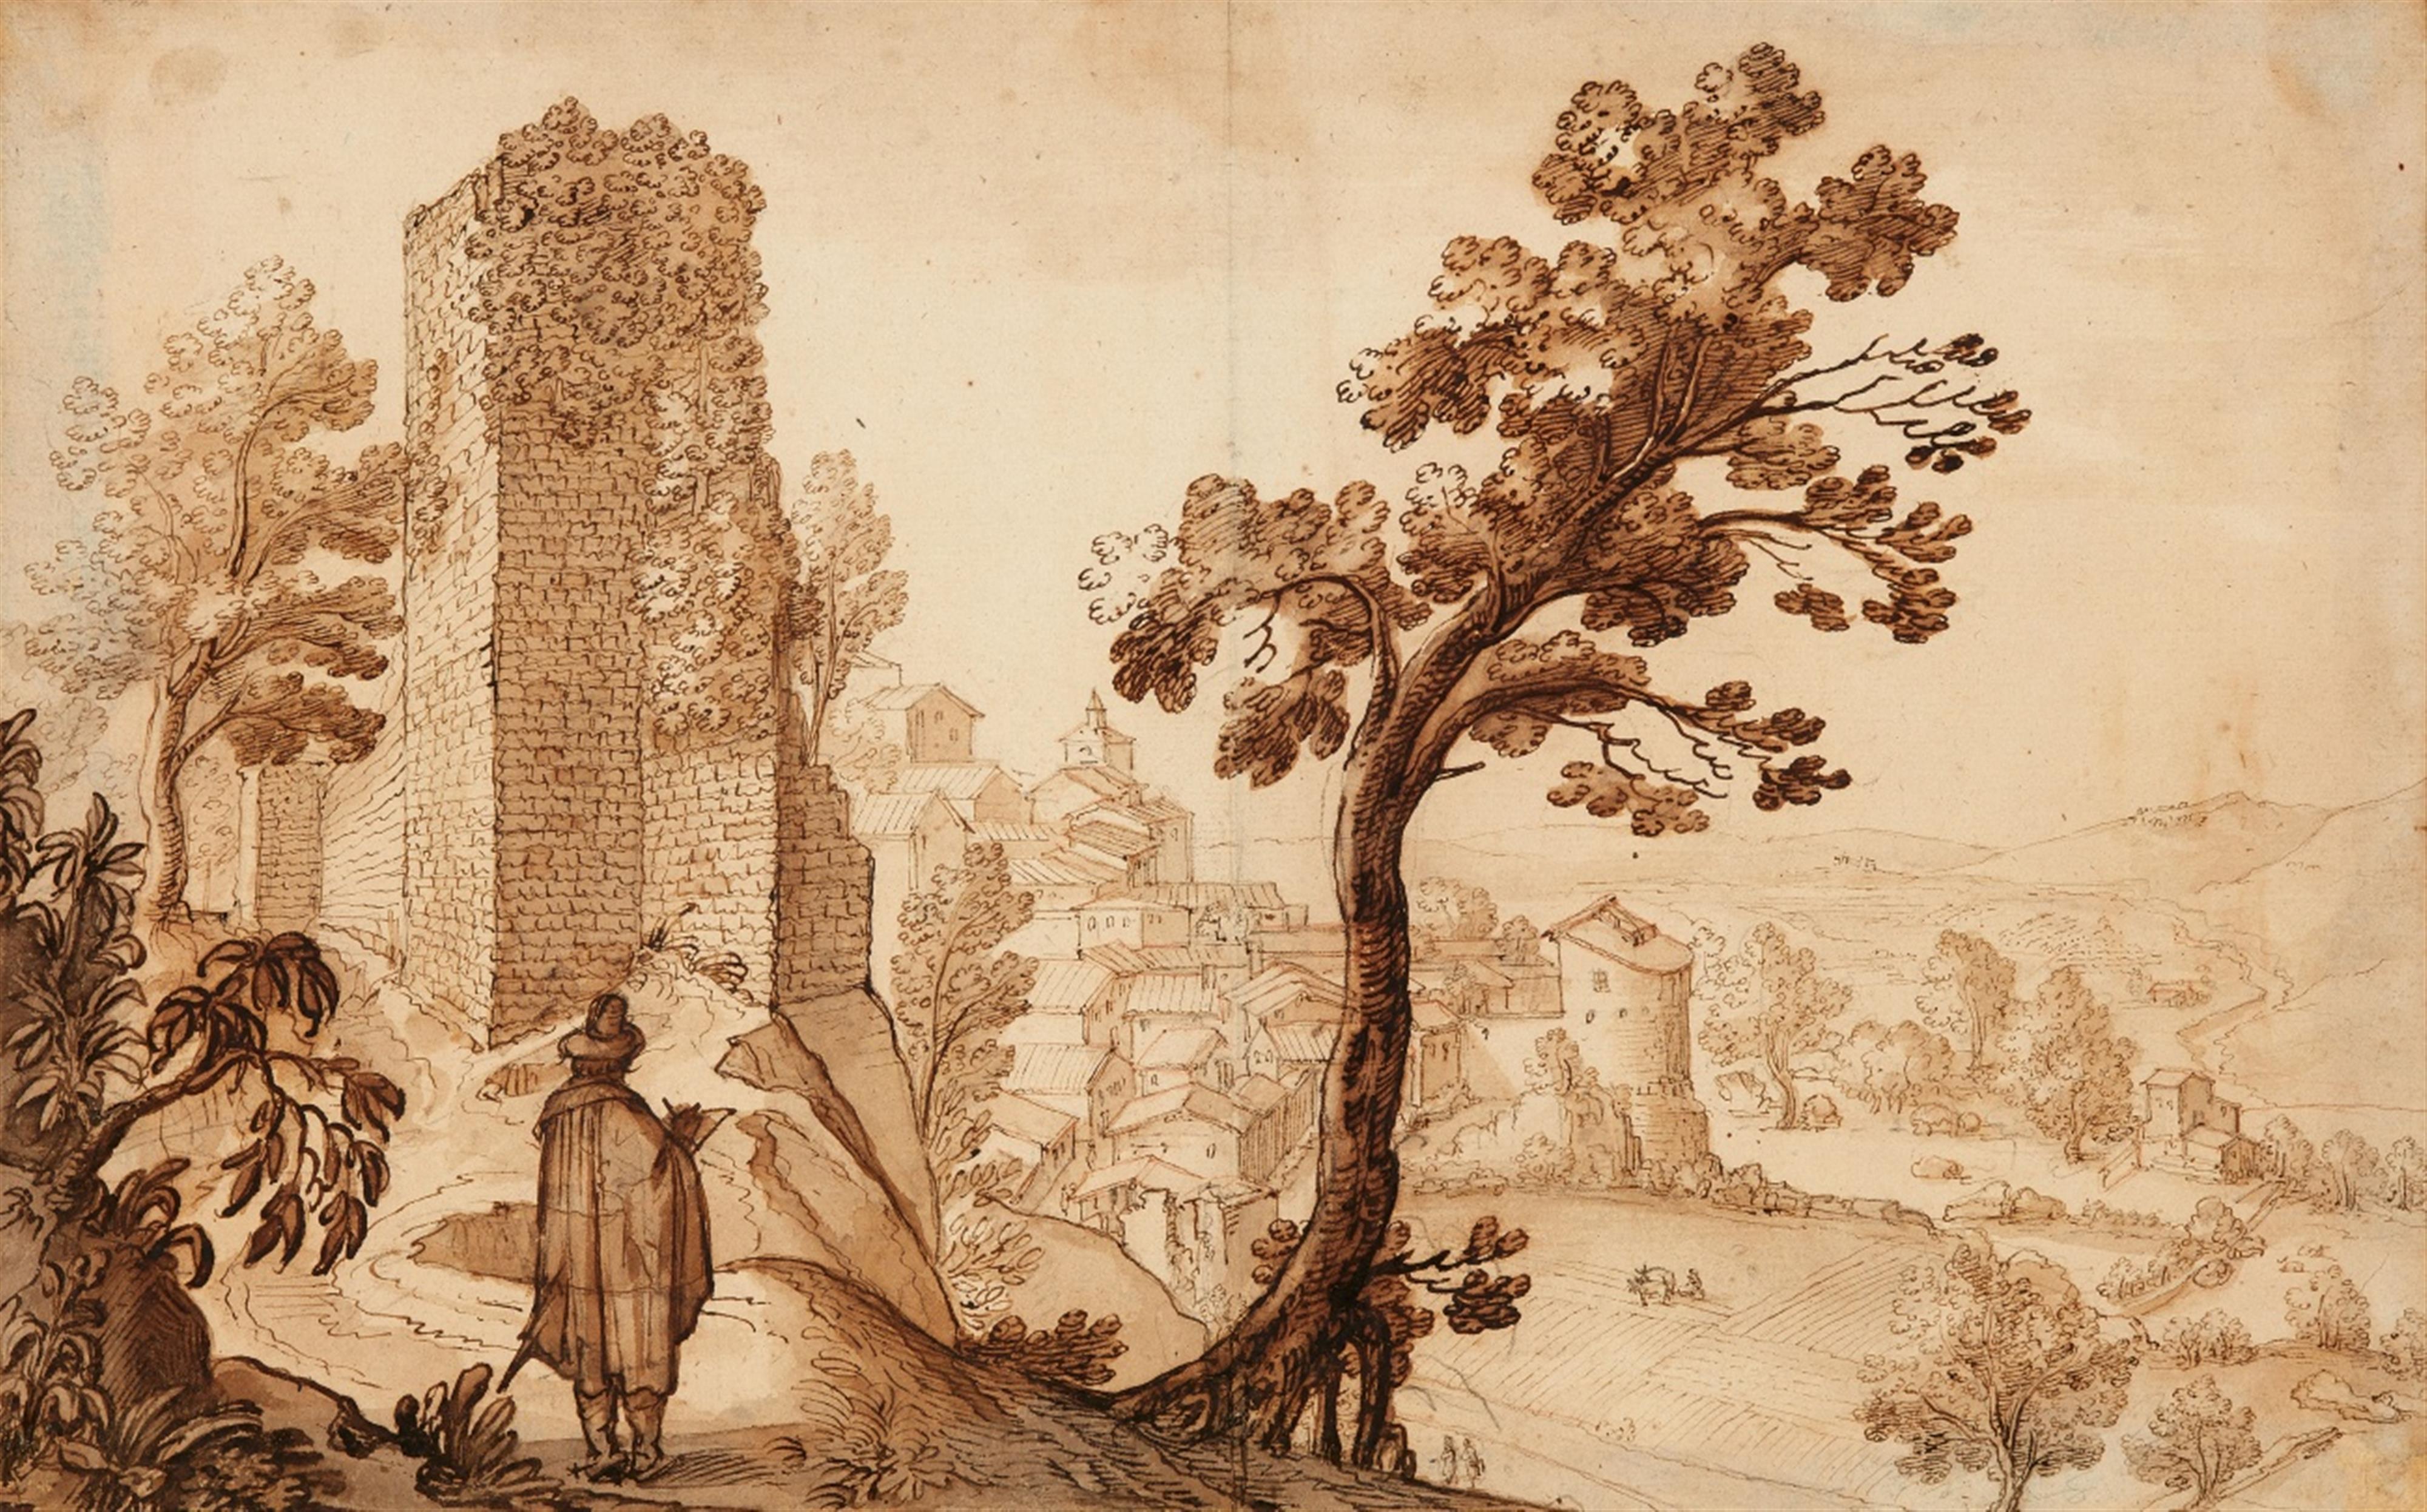 Remigio Cantagallina - A Southern Landscape with Ruins and a Man Sketching